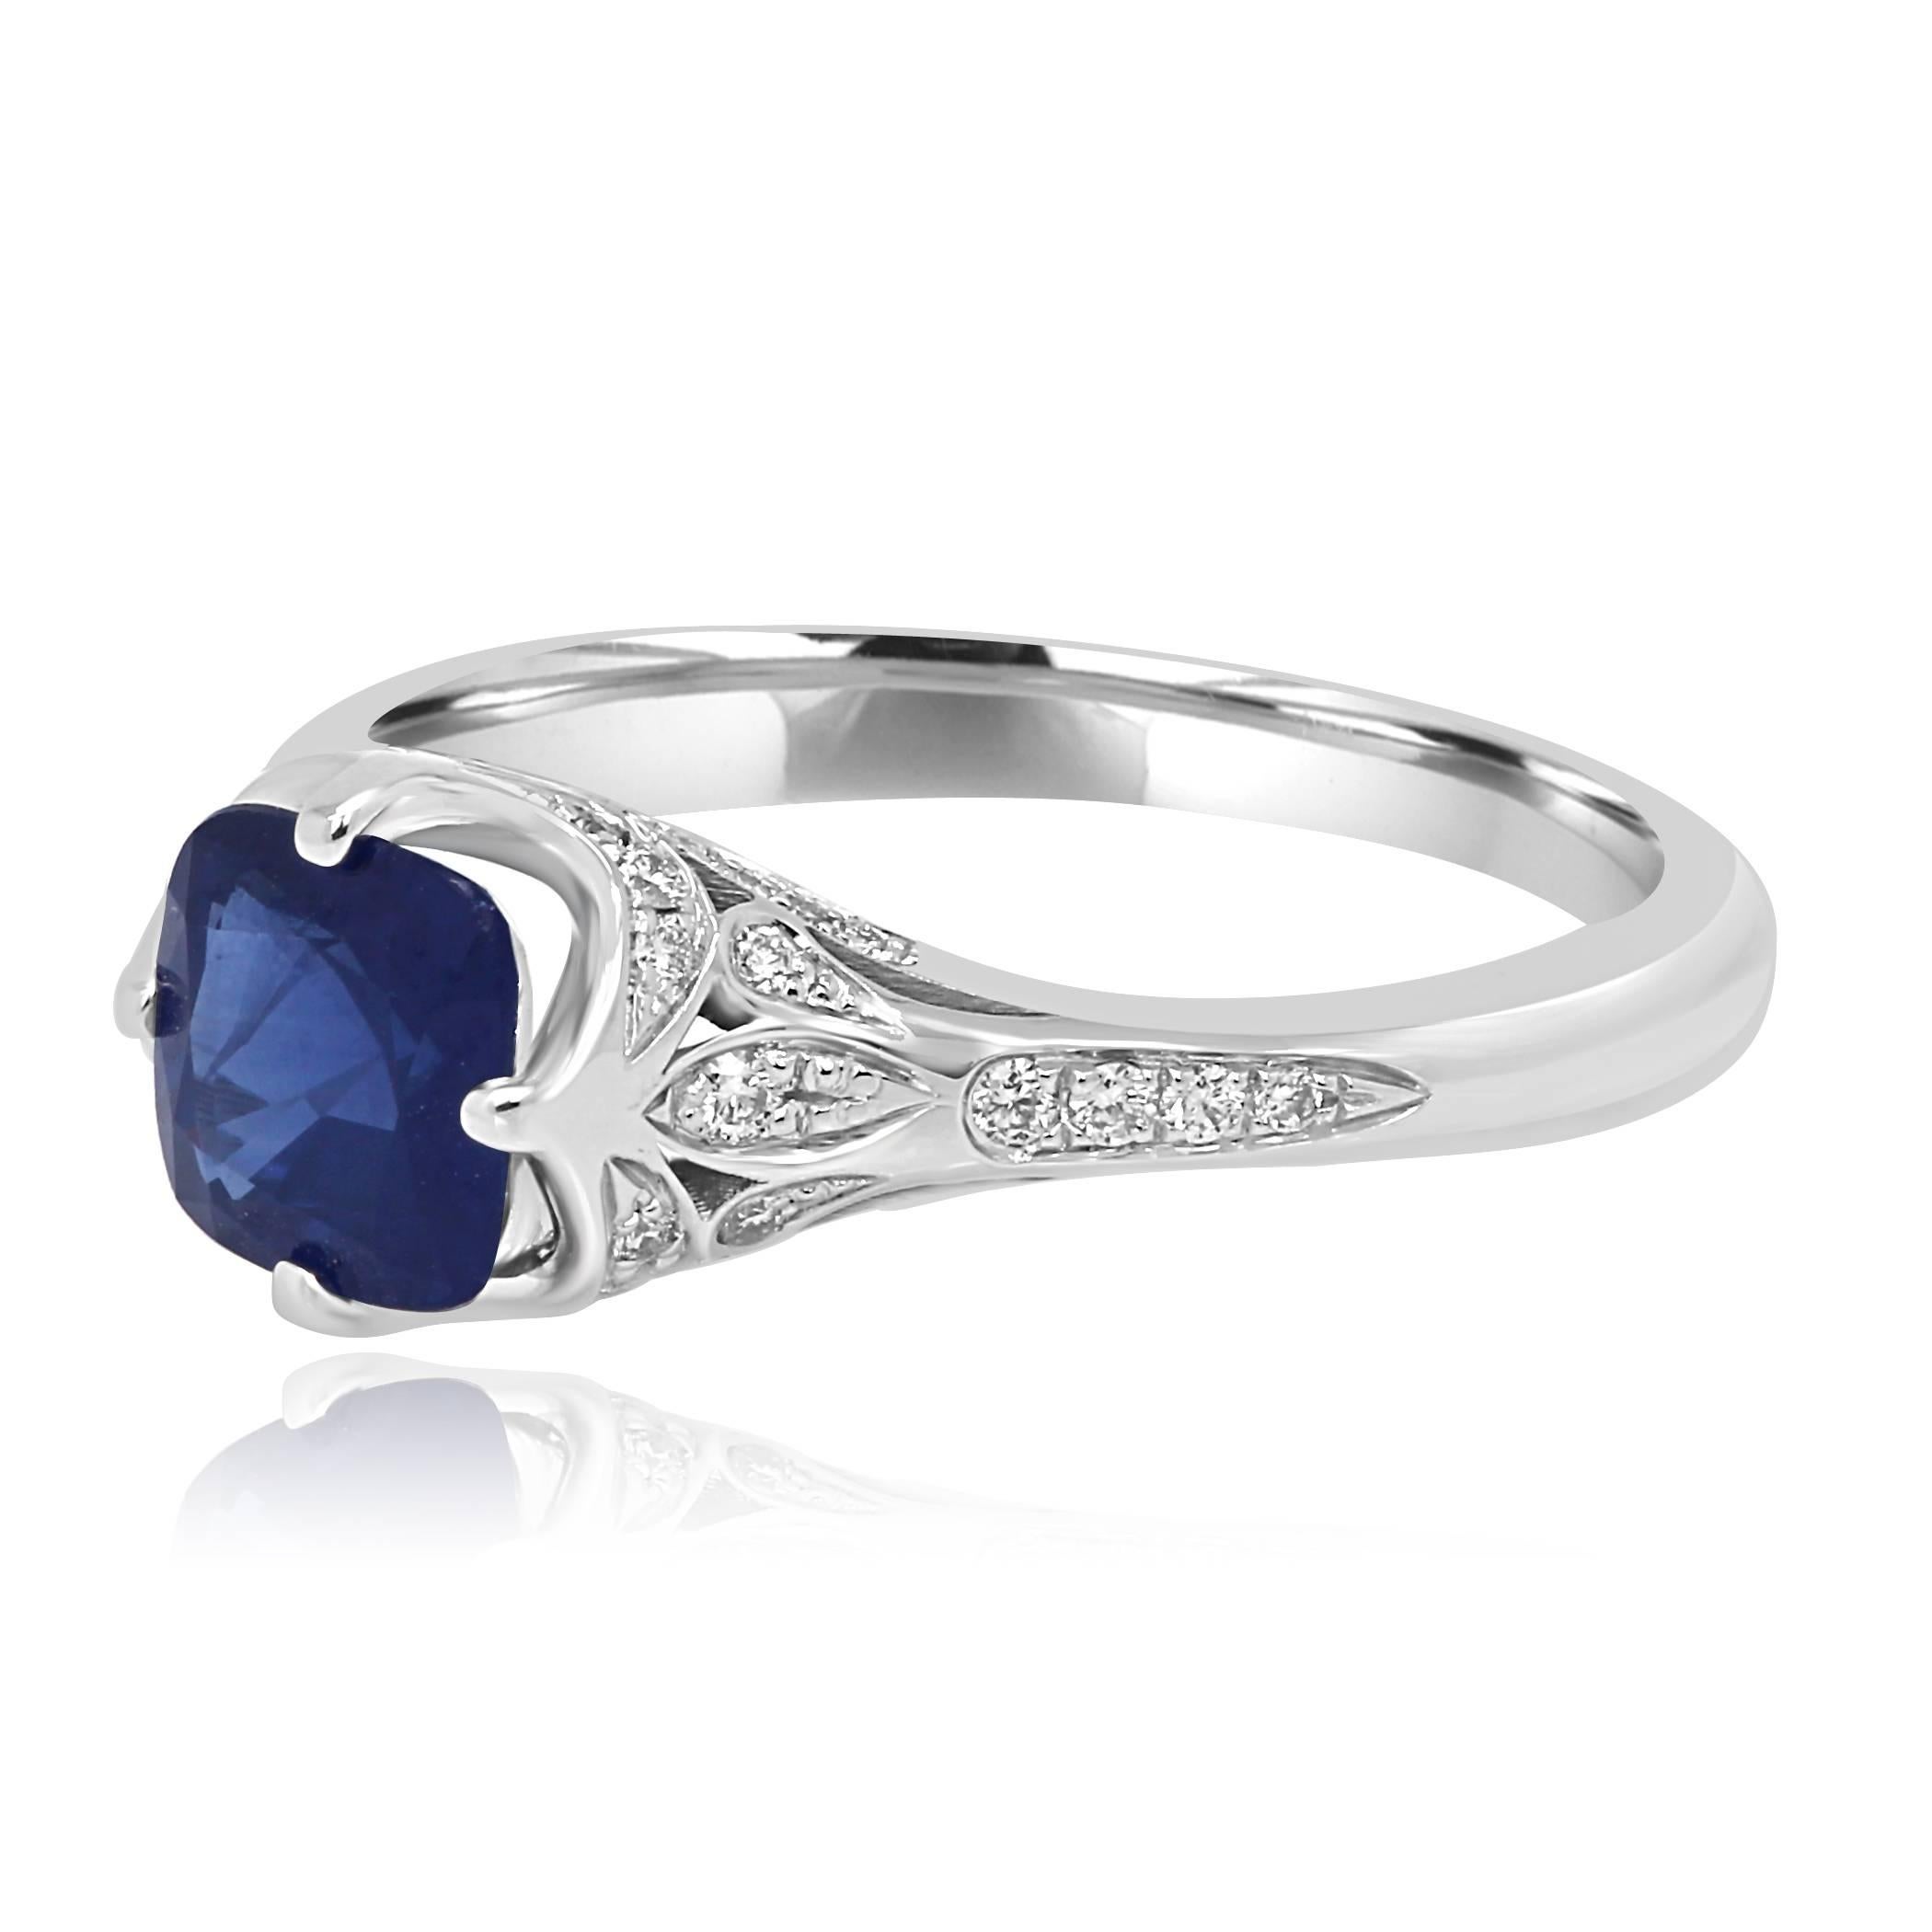 Gorgeous Blue Sapphire Cushion 1.20 Carat White Diamond 0.22 Carat in 14K White Gold Bridal Art Deco Style Ring.

Style available in different price ranges. Prices are based on your selection of 4C's Cut, Color, Carat, Clarity. Please contact us for